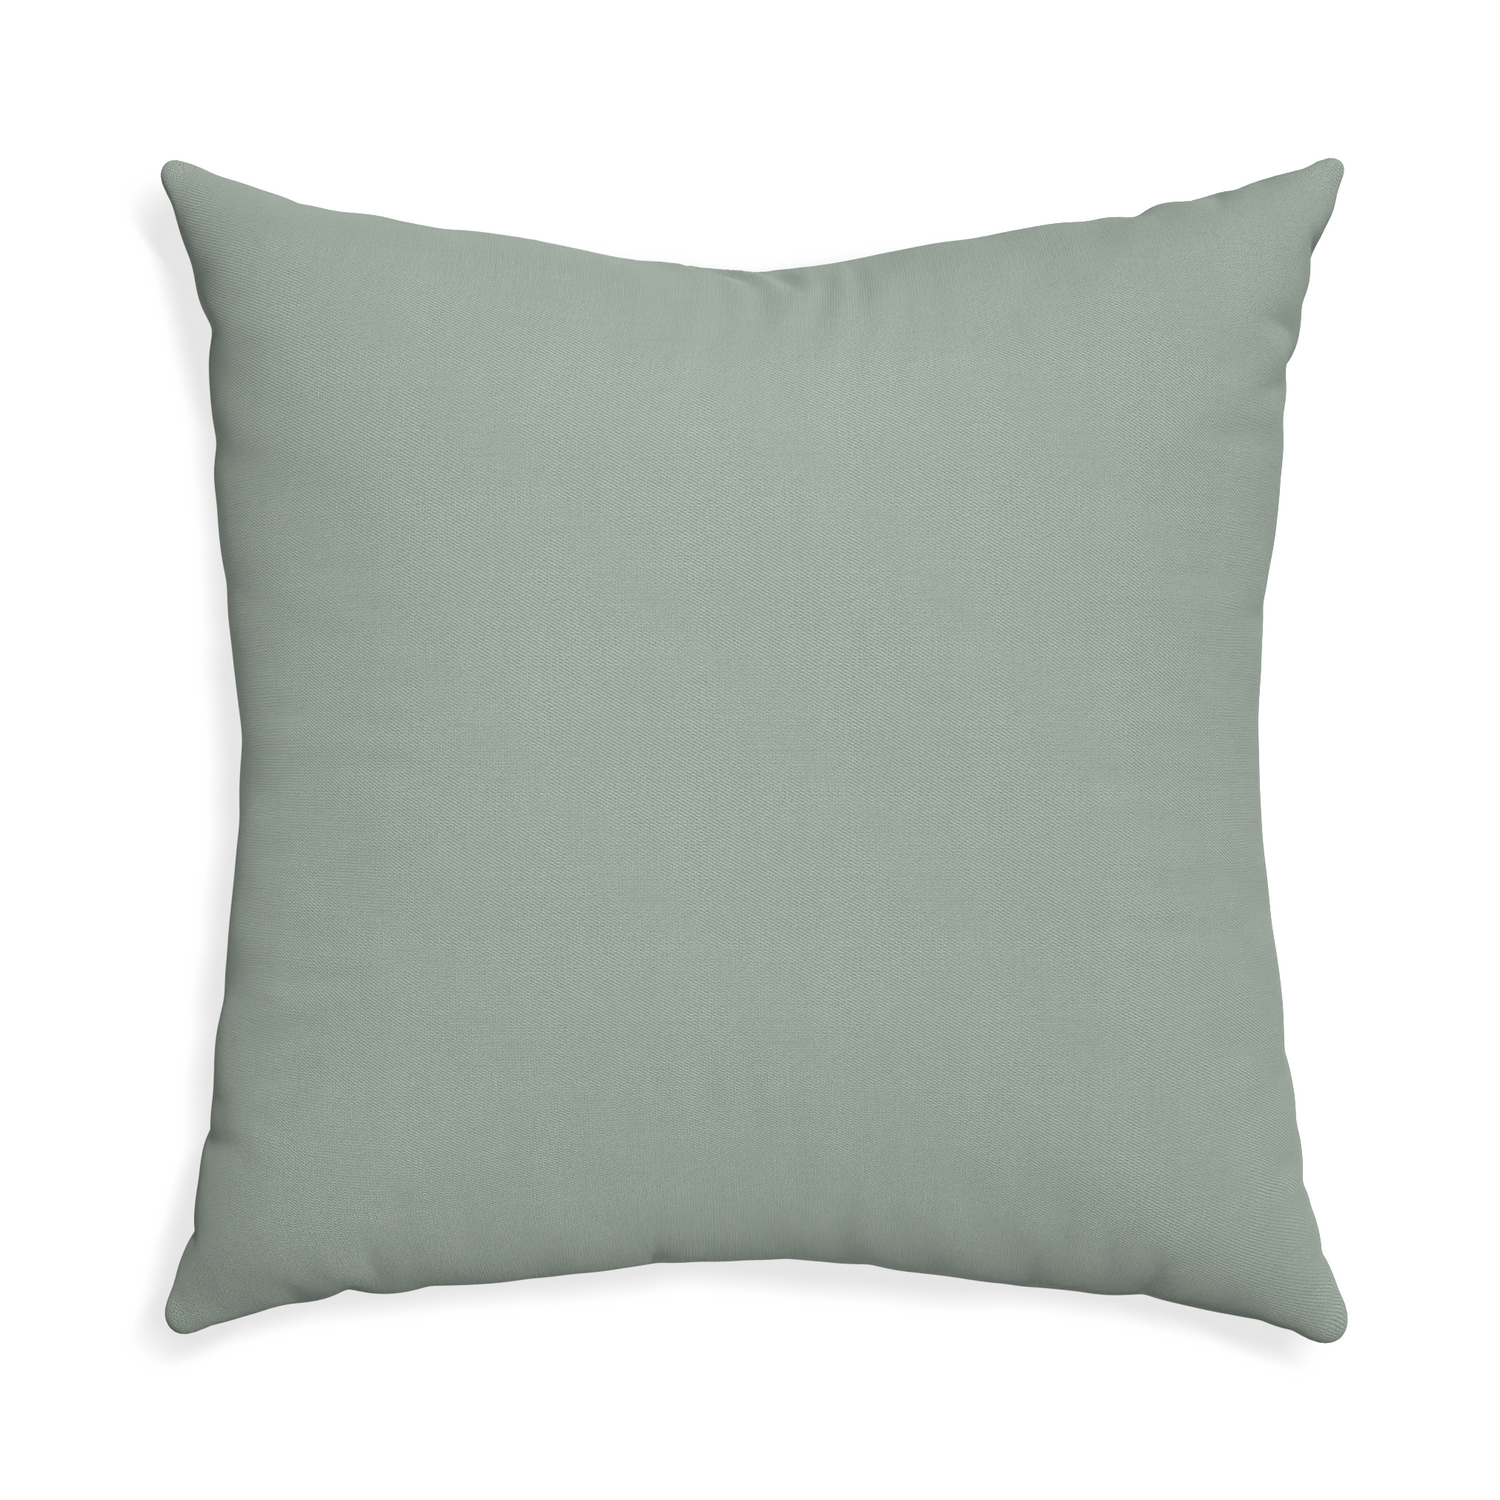 Euro-sham sage custom pillow with none on white background